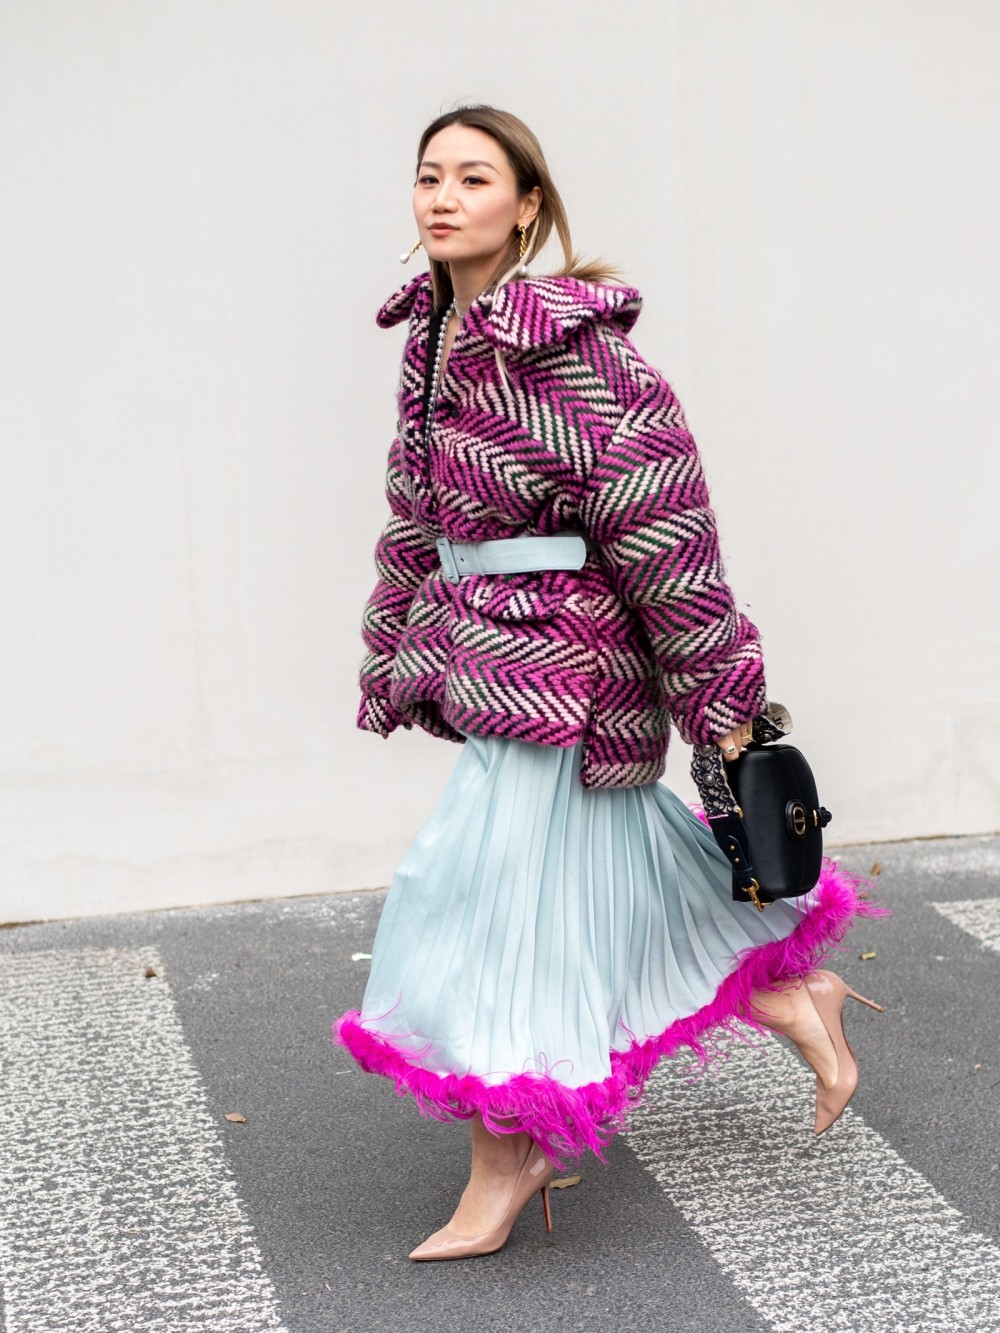 Signs of Spring These Bright Street Style Trends Are Ready to Bloom